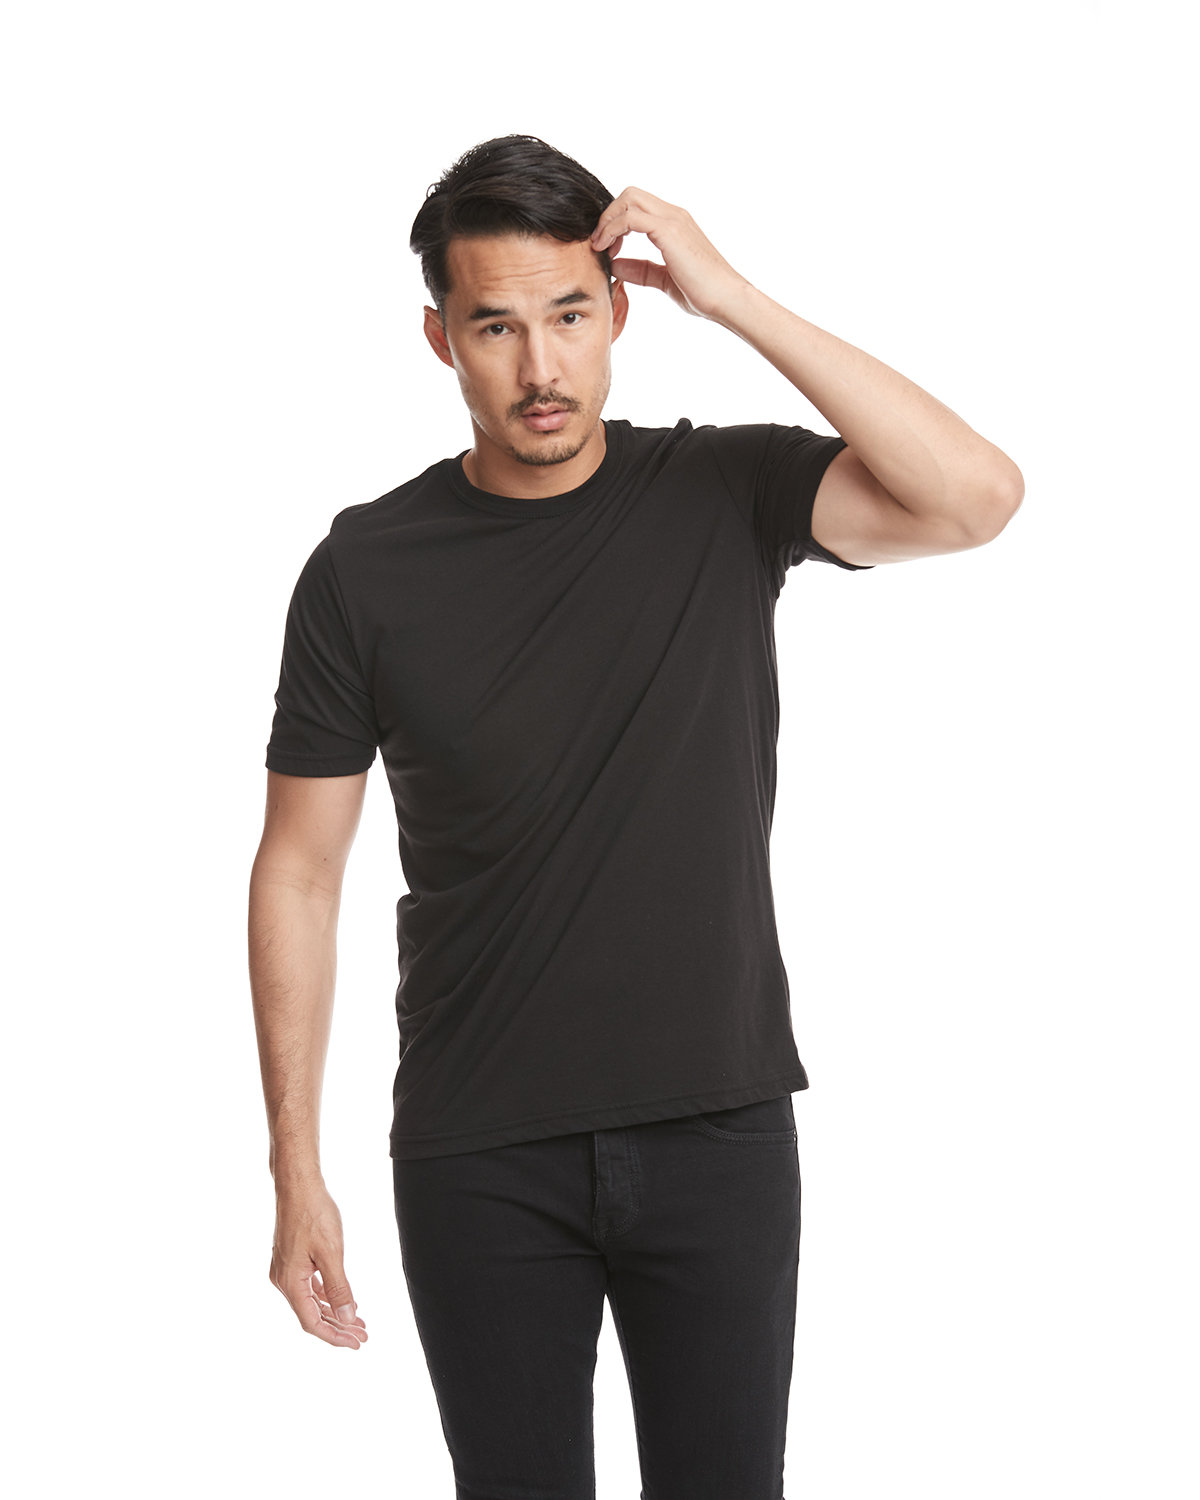 DISCONTINUED - Next Level Poly/Cotton Crew Neck T-Shirt